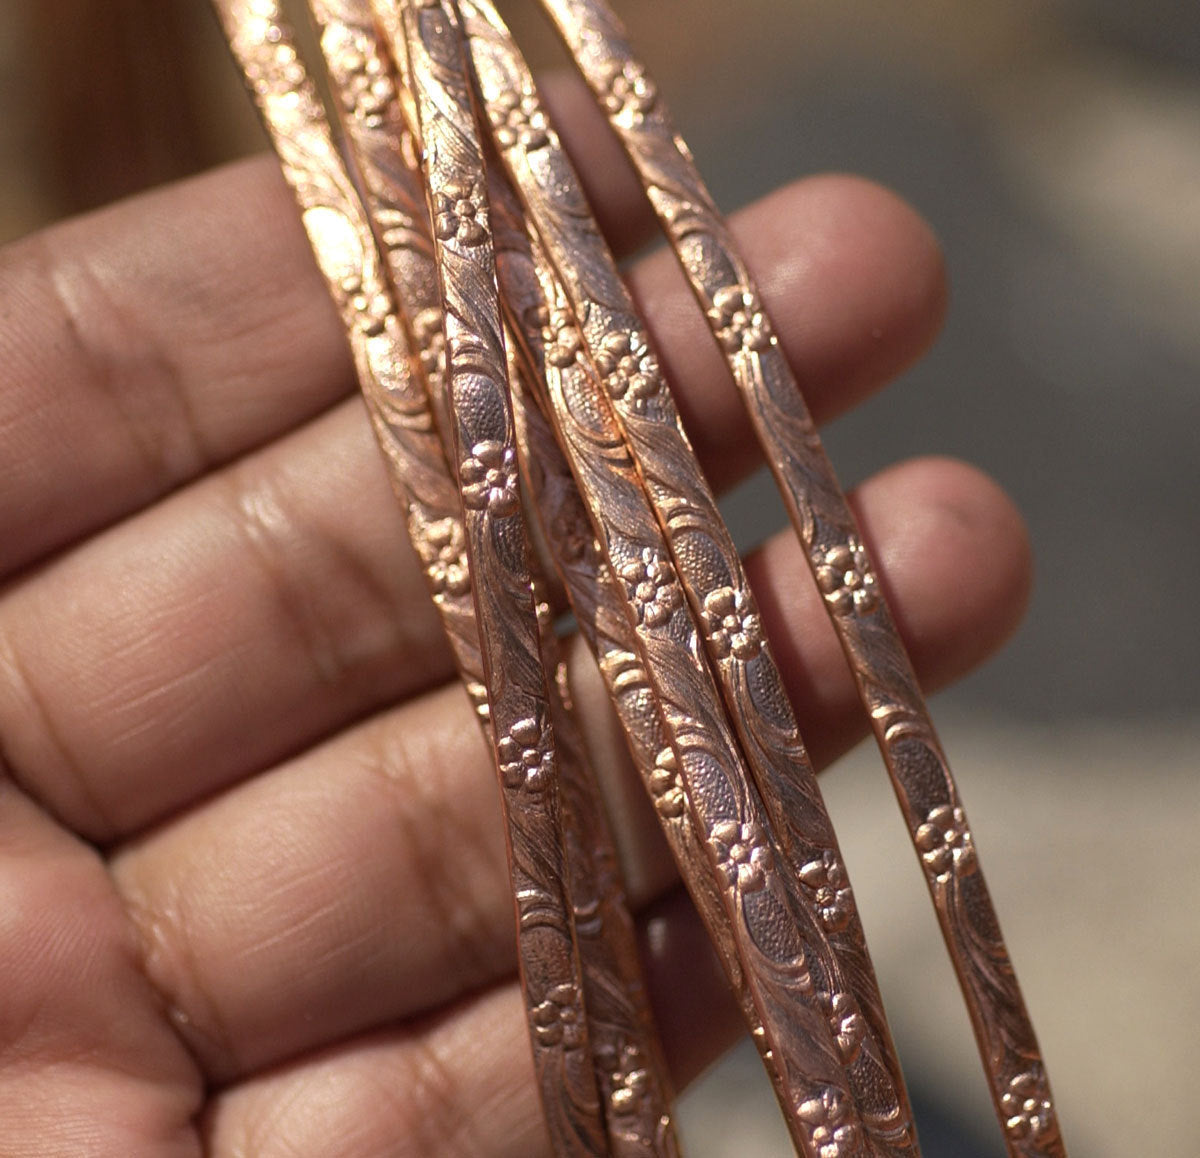 Copper Ring Stock Shank 4.5mm Daisys Textured Metal Cane Gallery Wire - Rings Bracelets Pendants Metalwork